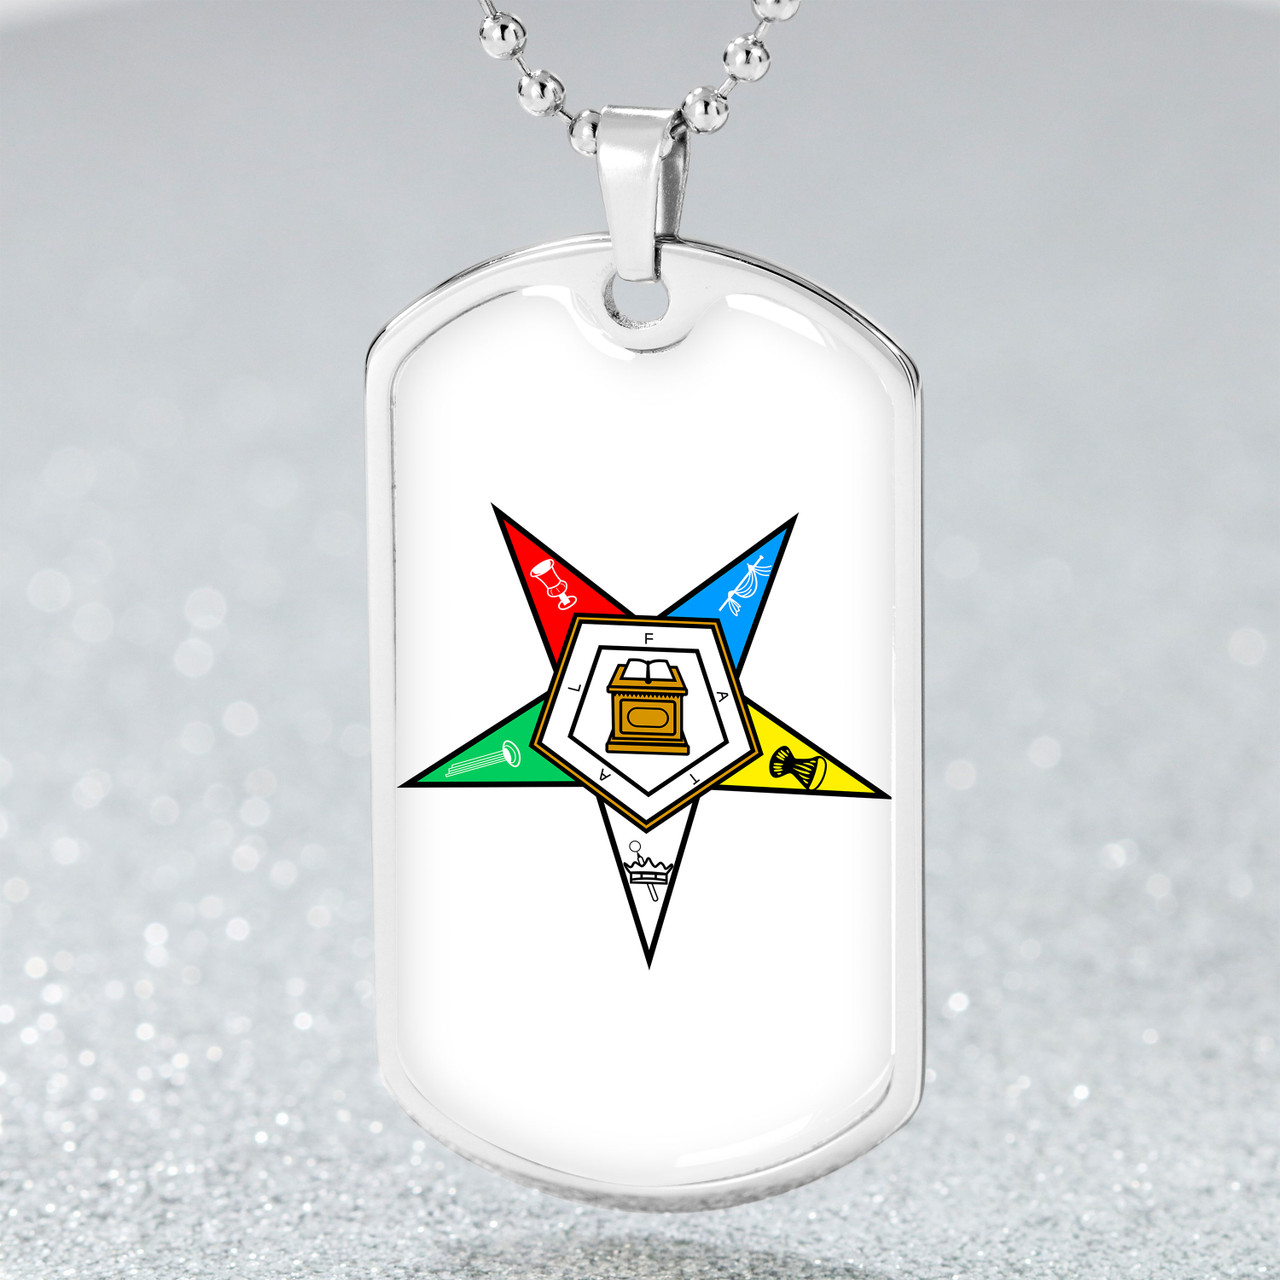 Order of the Eastern Star Military Dog Tag Necklace Shield